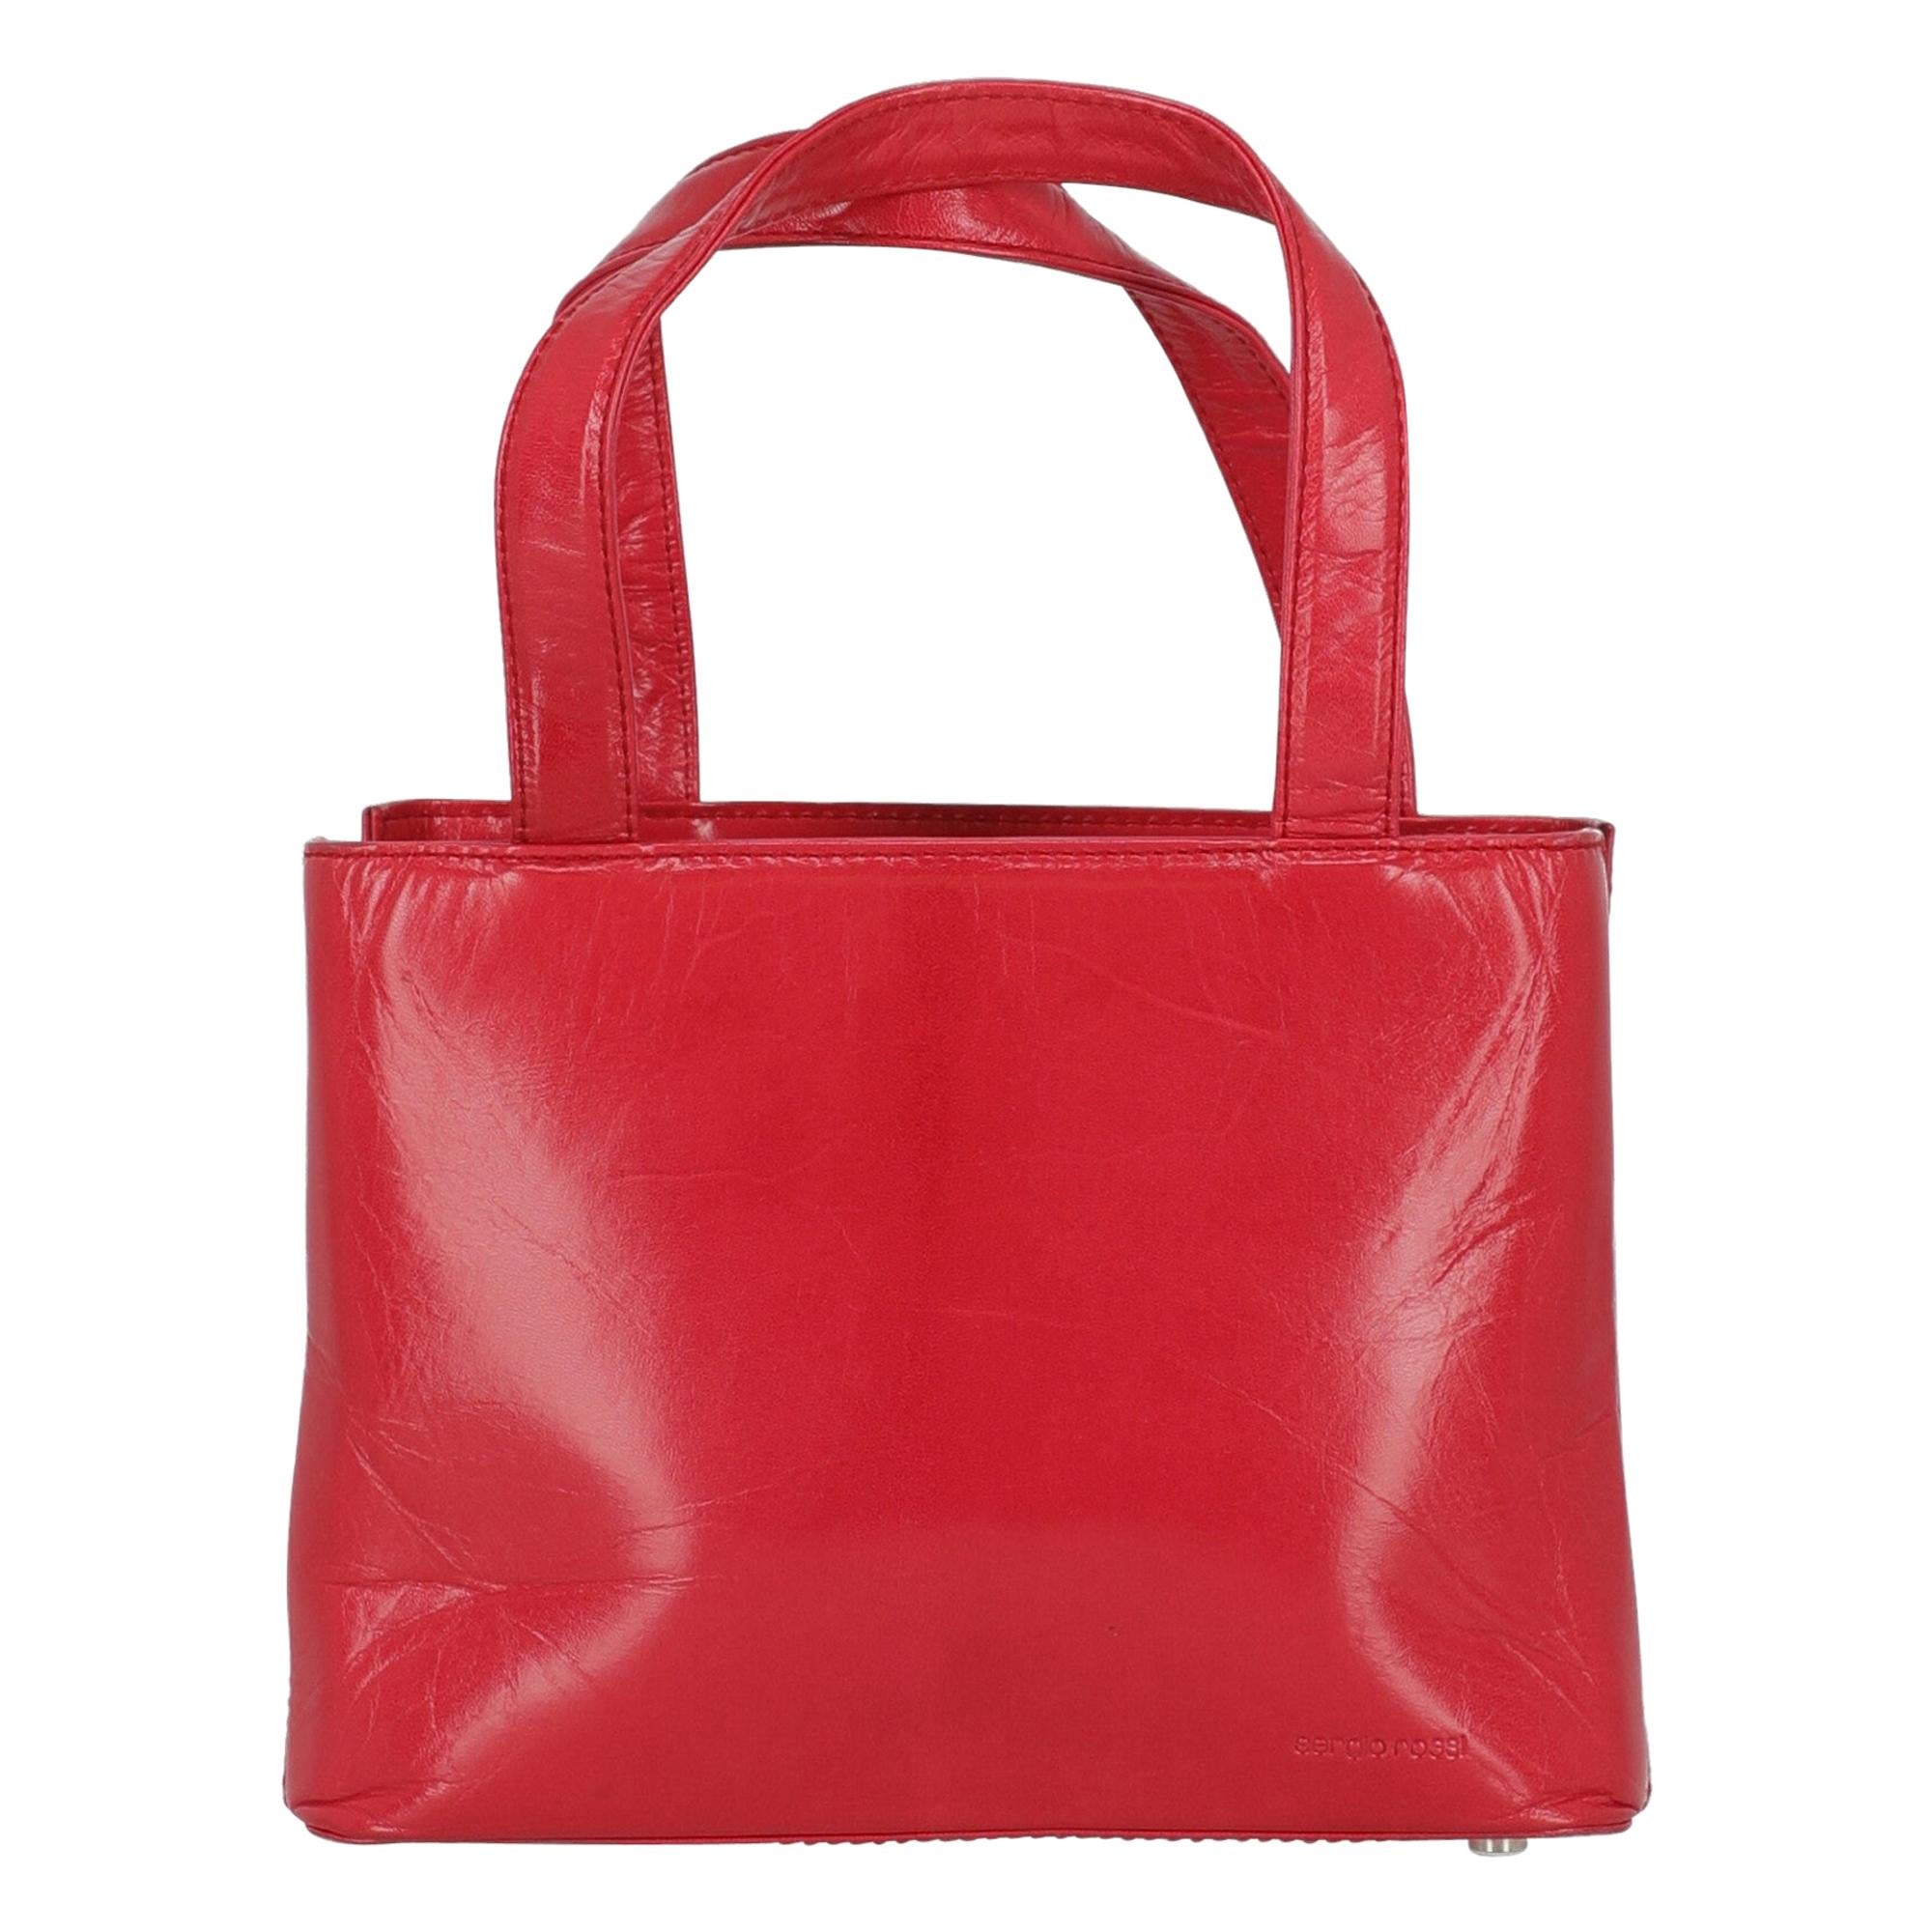 Sergio Rossi Woman Handbag Red Leather For Sale